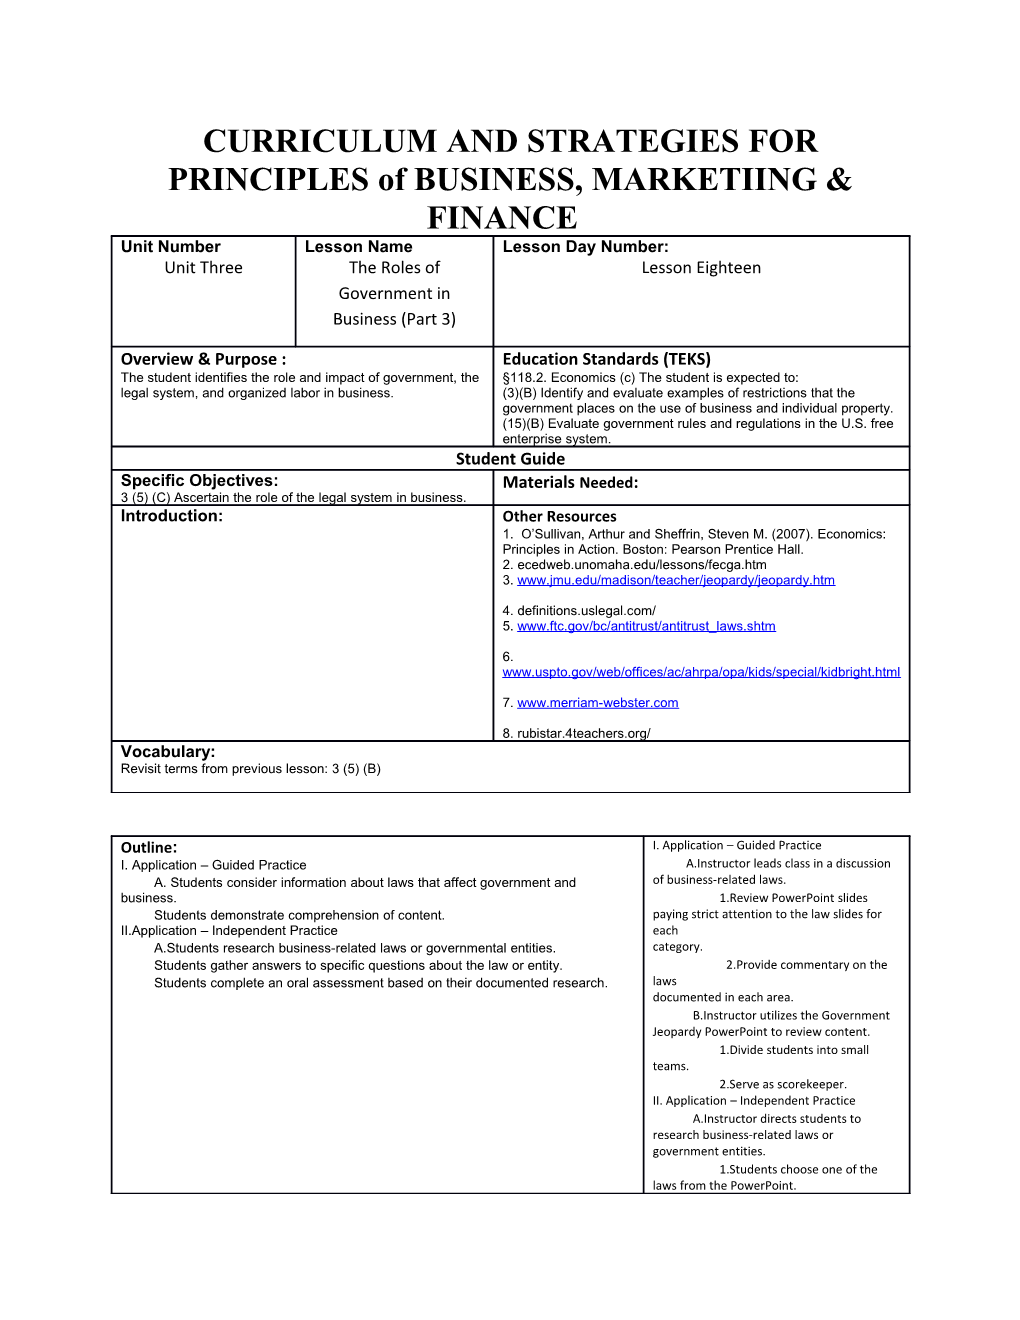 CURRICULUM and STRATEGIES for PRINCIPLES of BUSINESS, MARKETIING & FINANCE